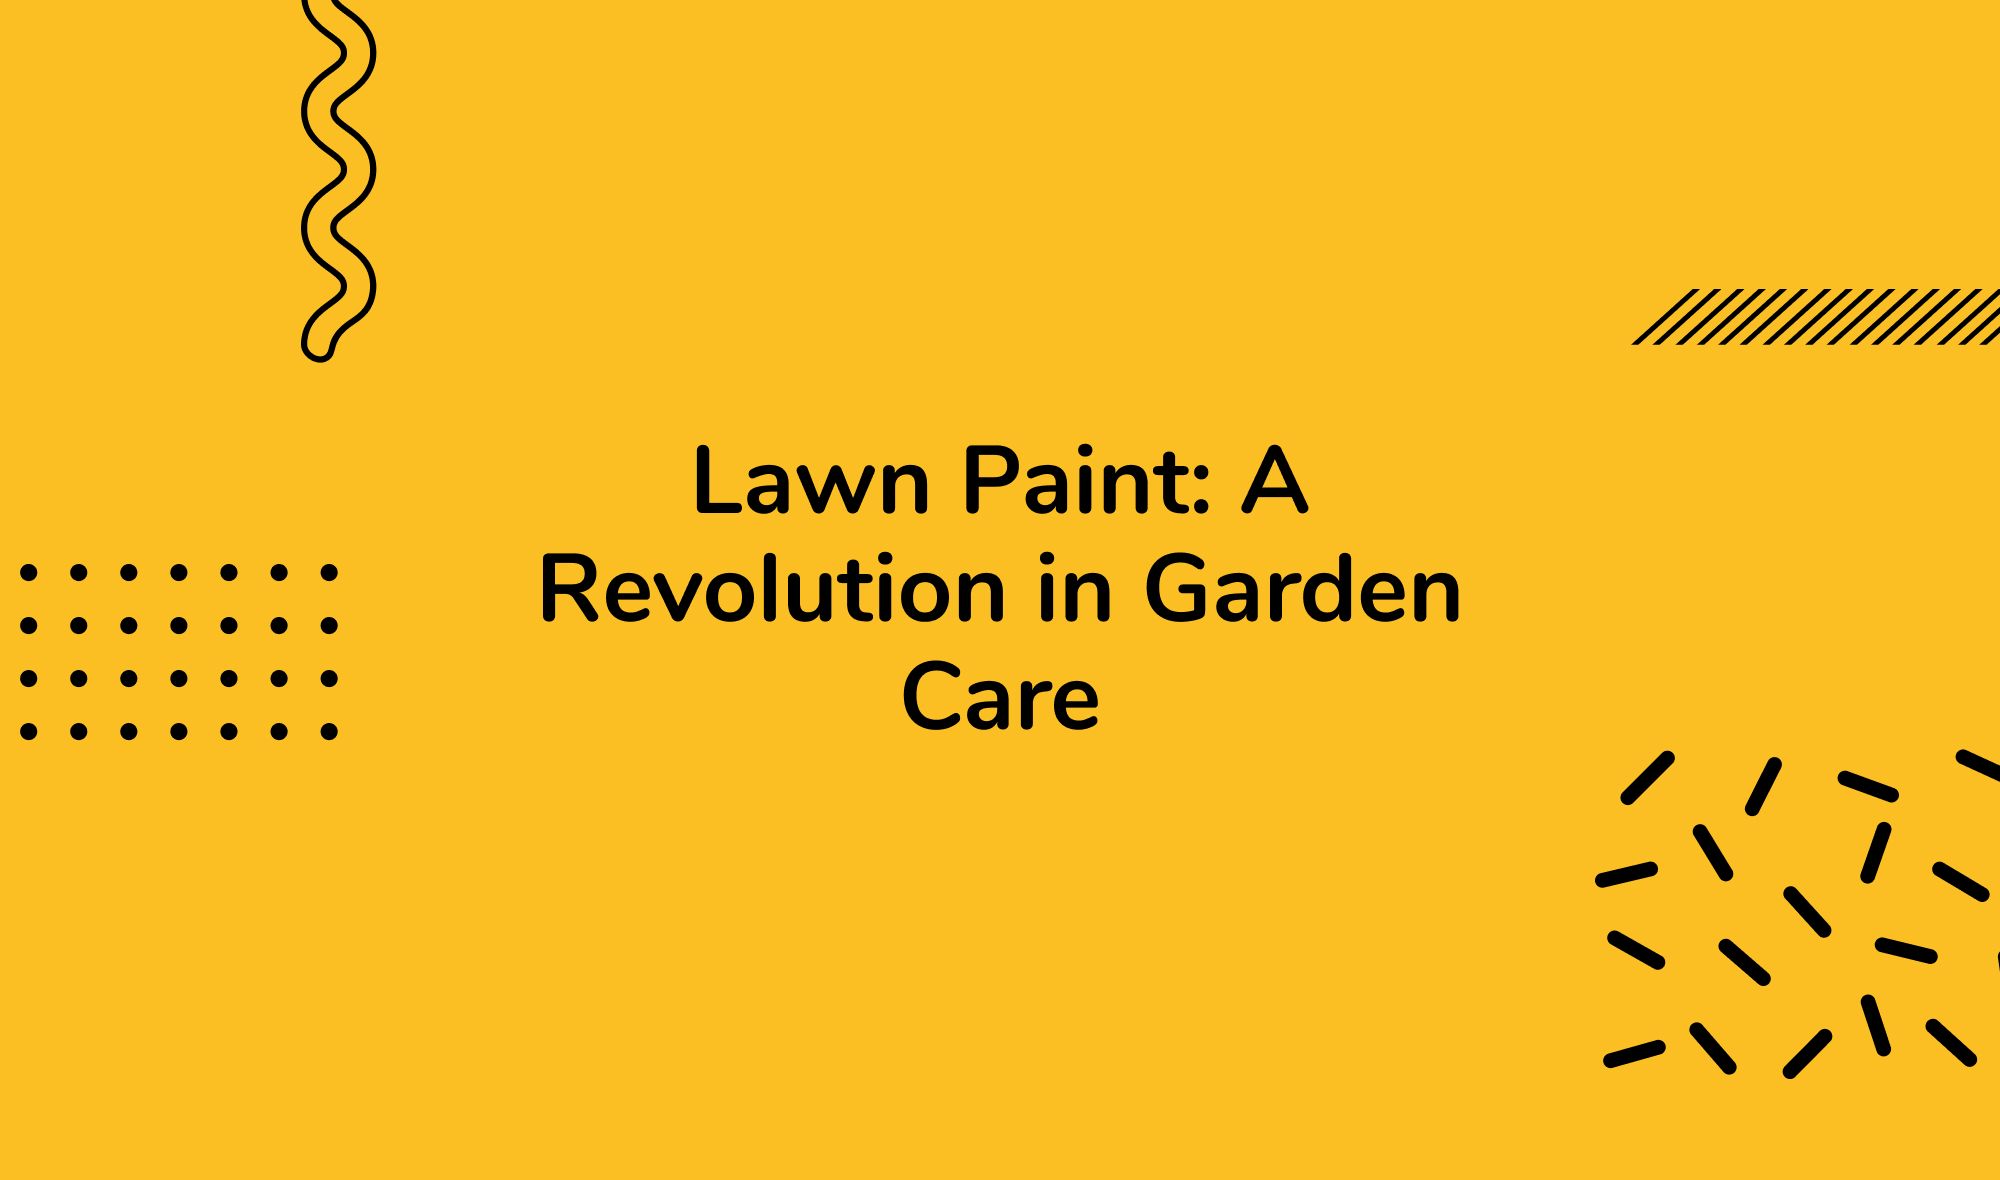 Lawn Paint: A Revolution in Garden Care